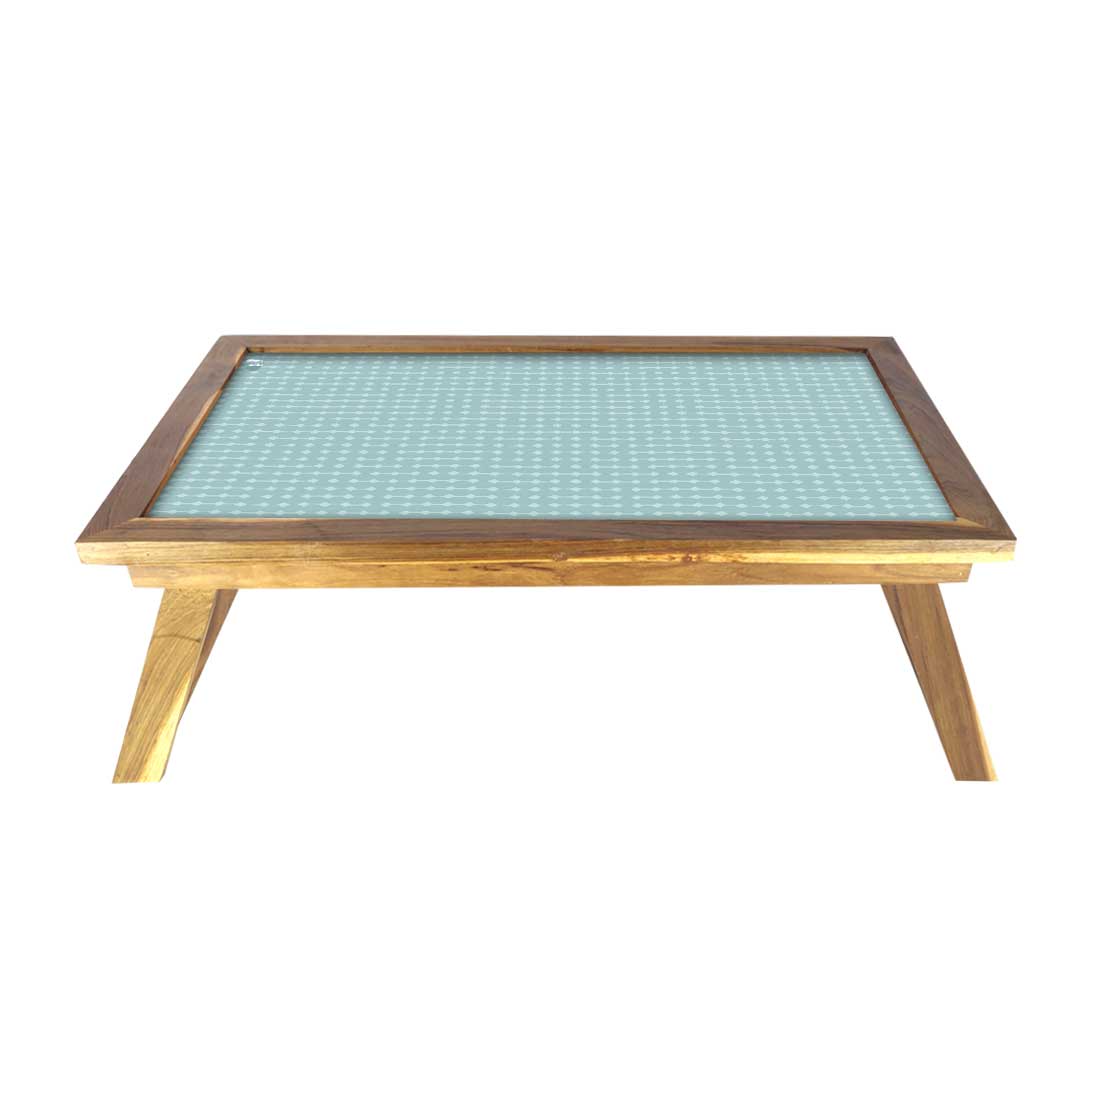 Modern Wooden Breakfast Tables Bed Study Table for Students - Pattern Lines Nutcase